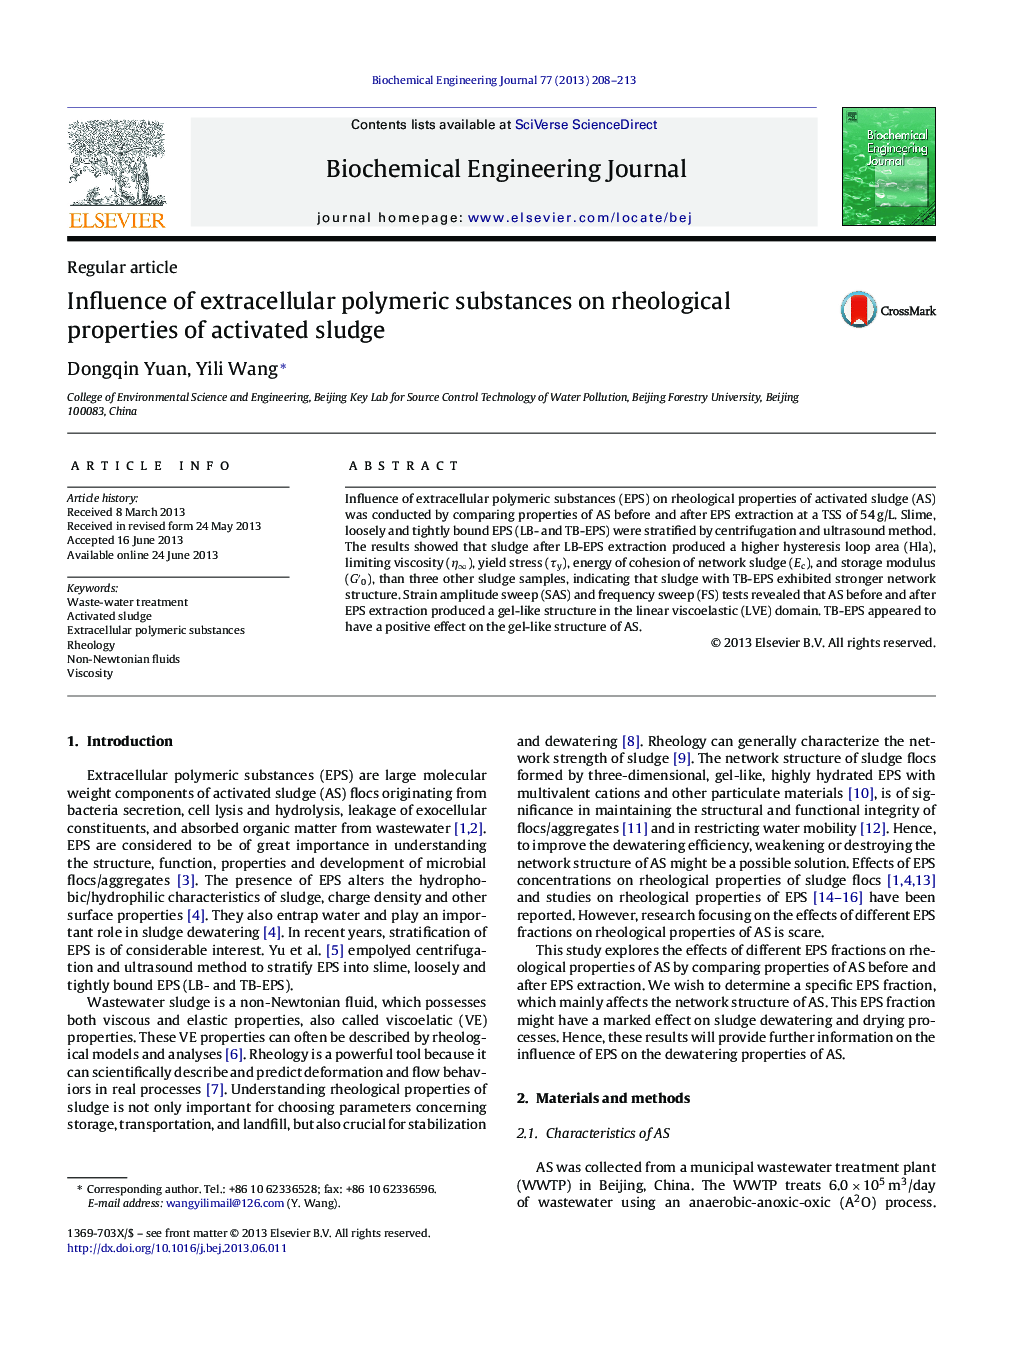 Influence of extracellular polymeric substances on rheological properties of activated sludge